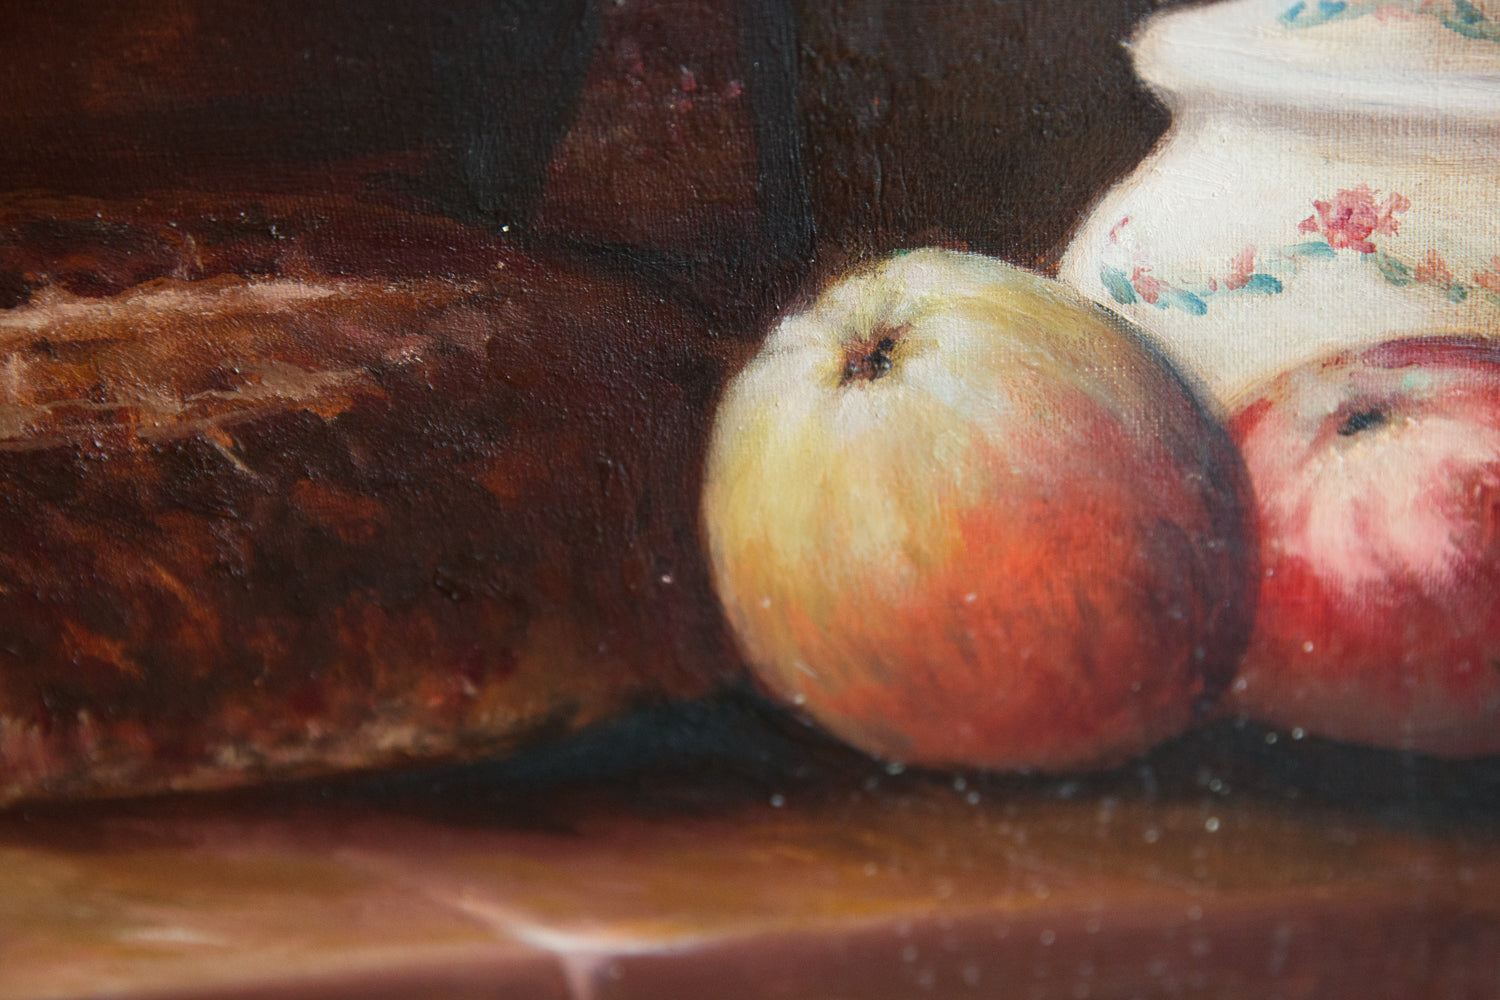 French Oil Canvas - Apples & Bread